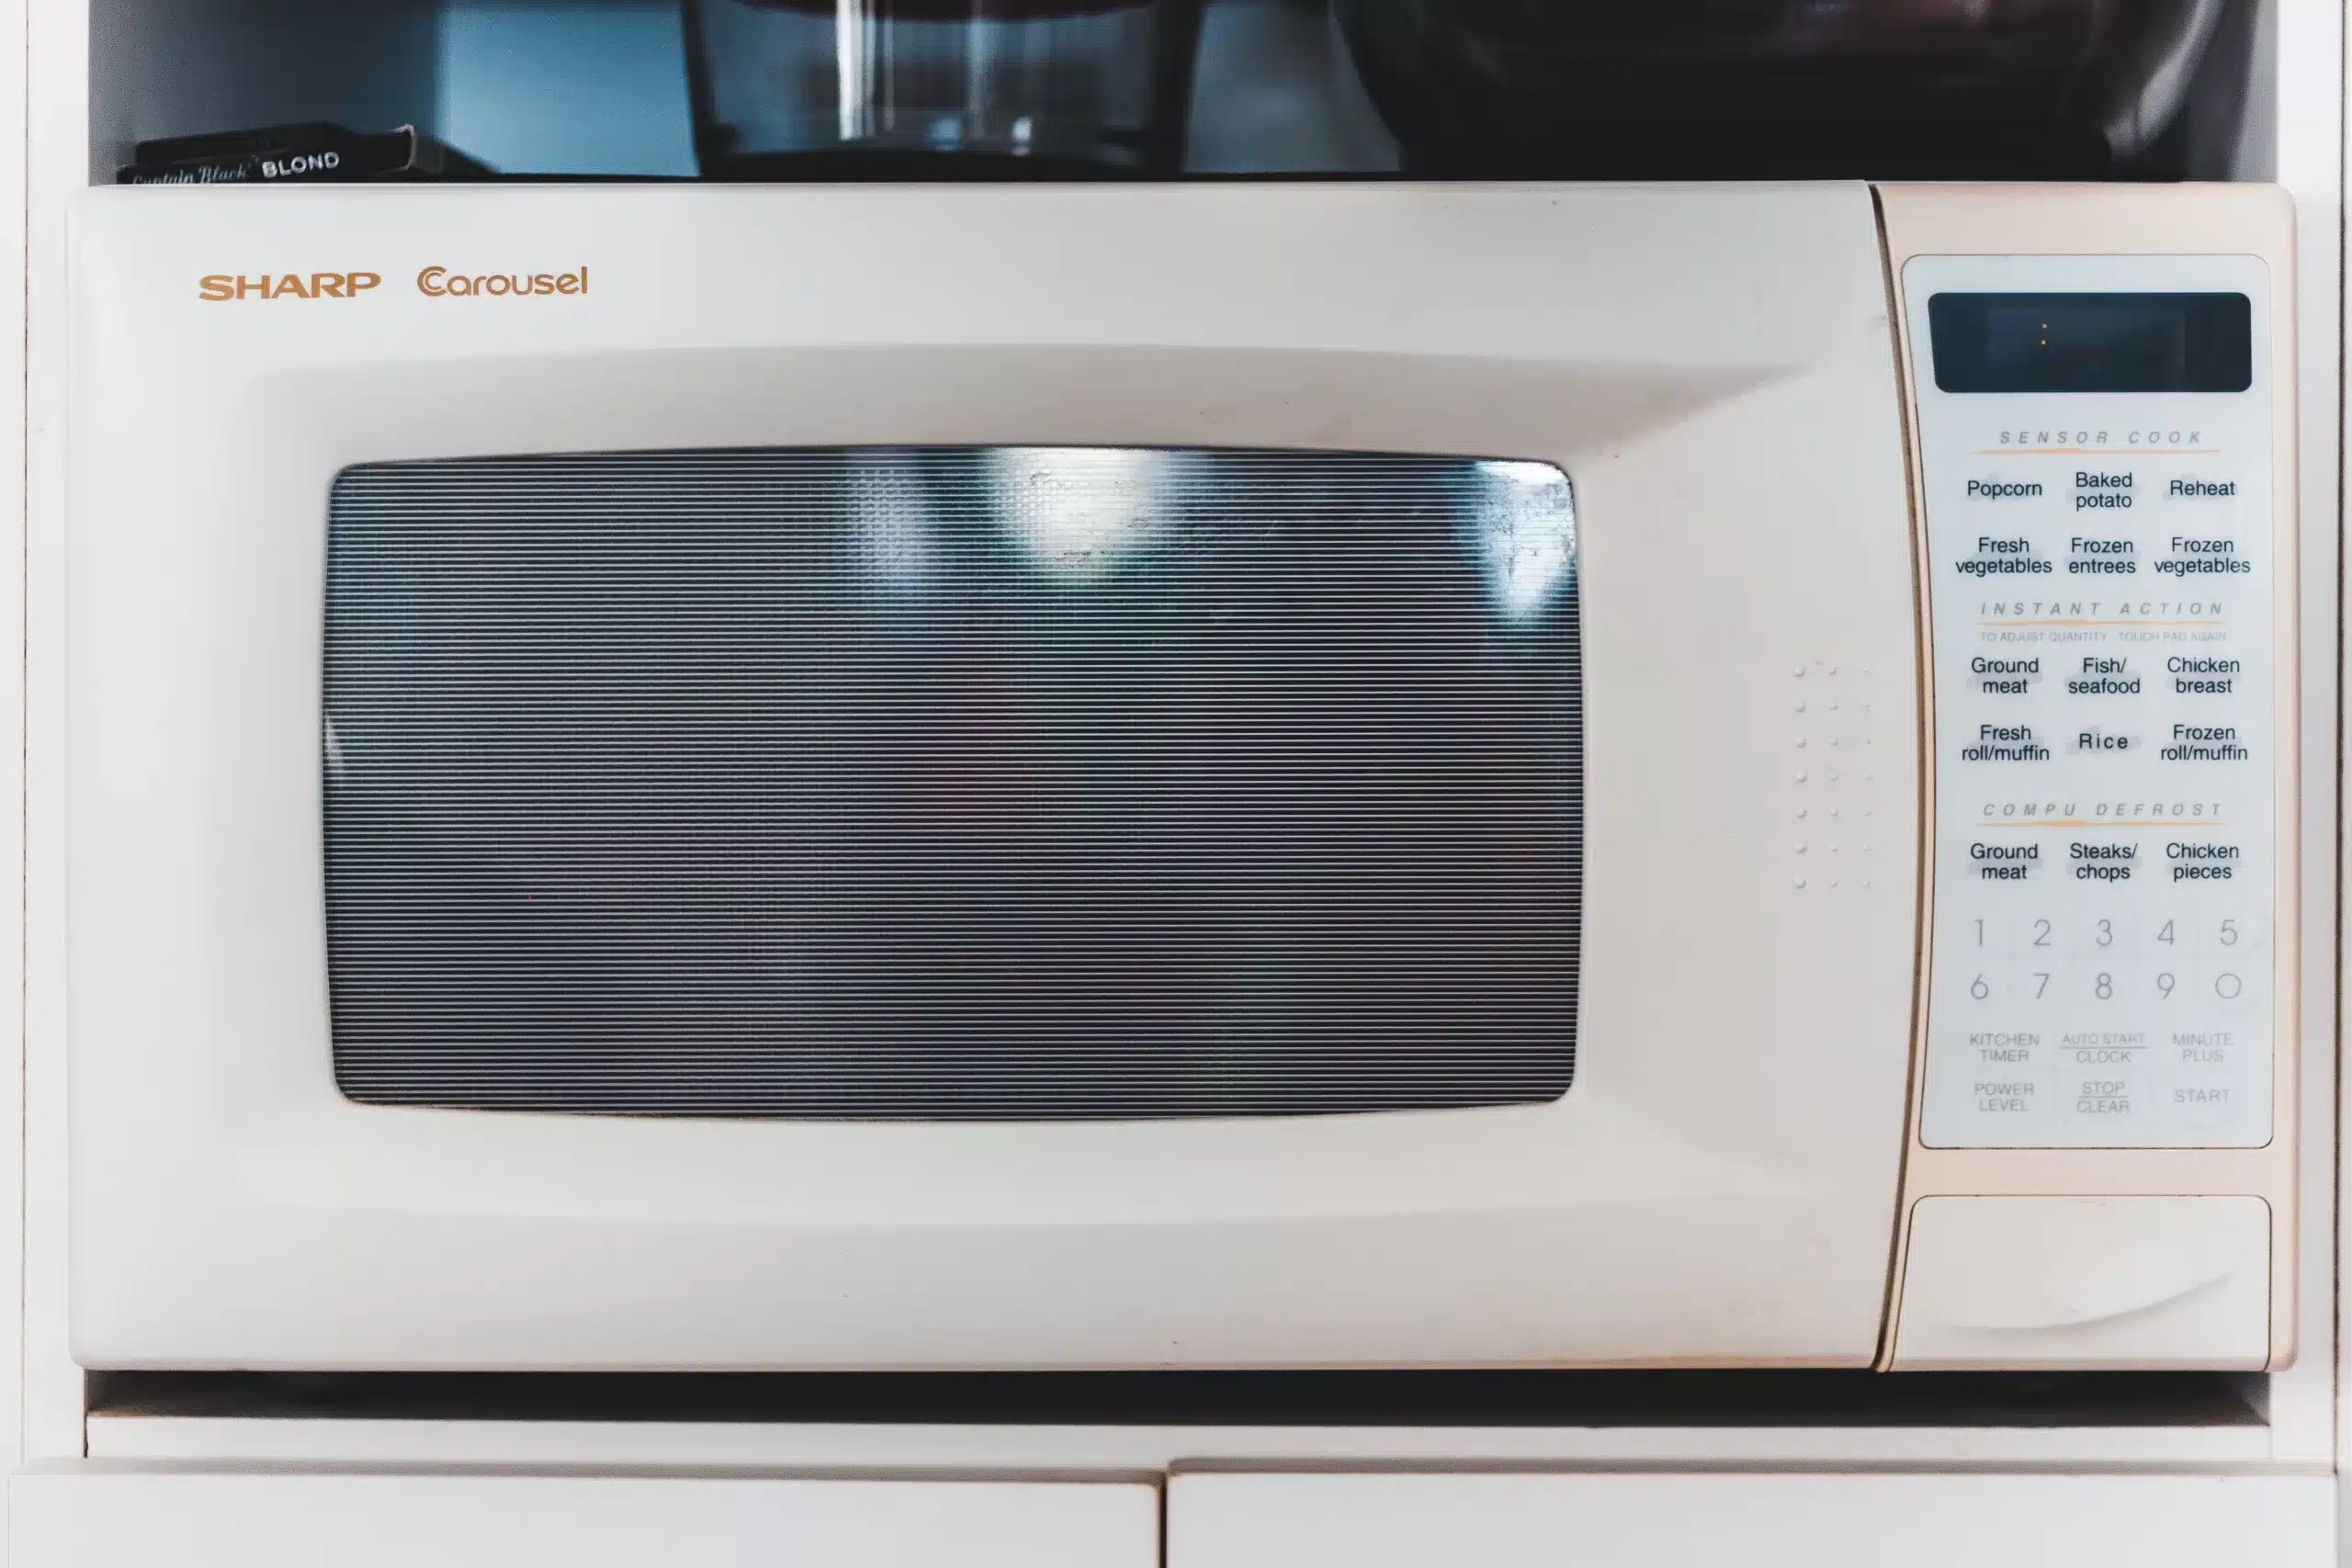 How to Clean Microwave: The Easy Way to Remove Stains and Odors